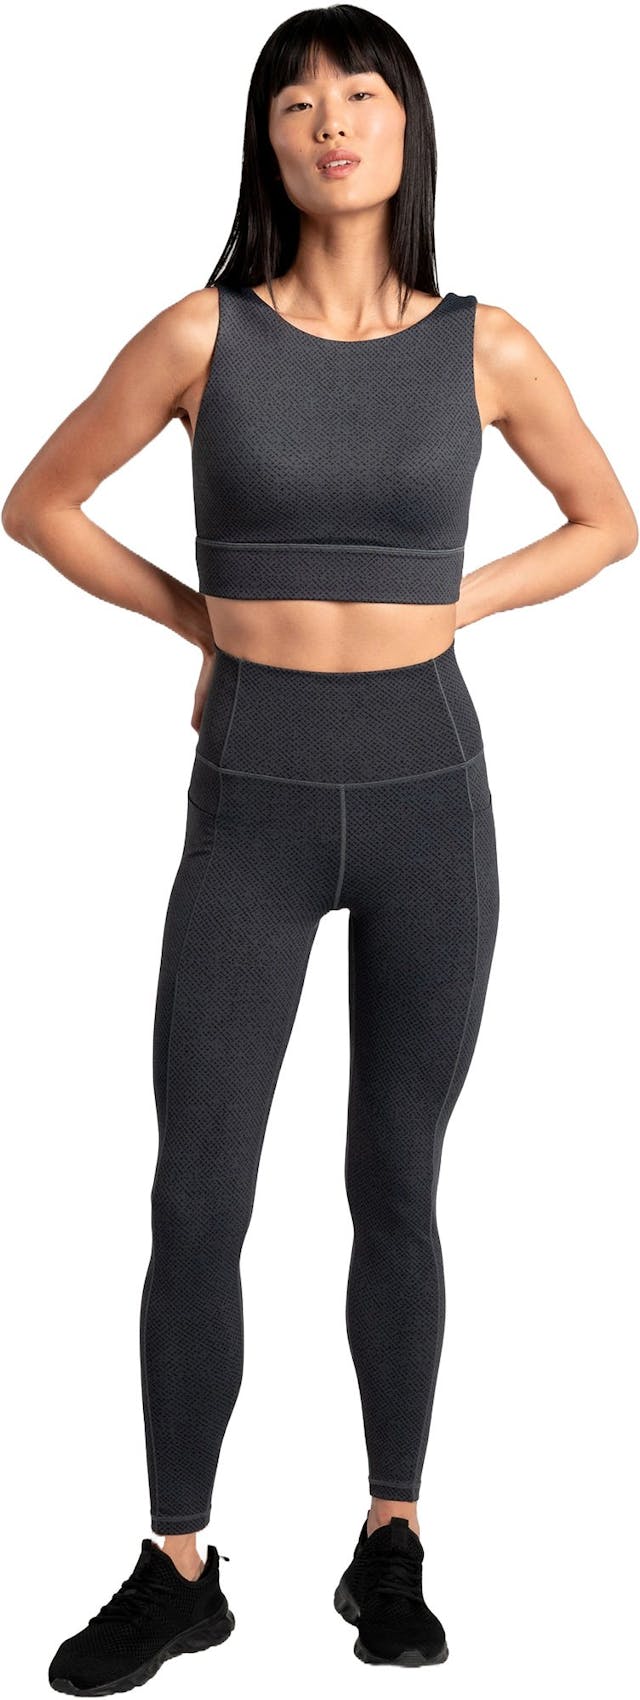 Product image for Step Up Ankle Leggings - Women's